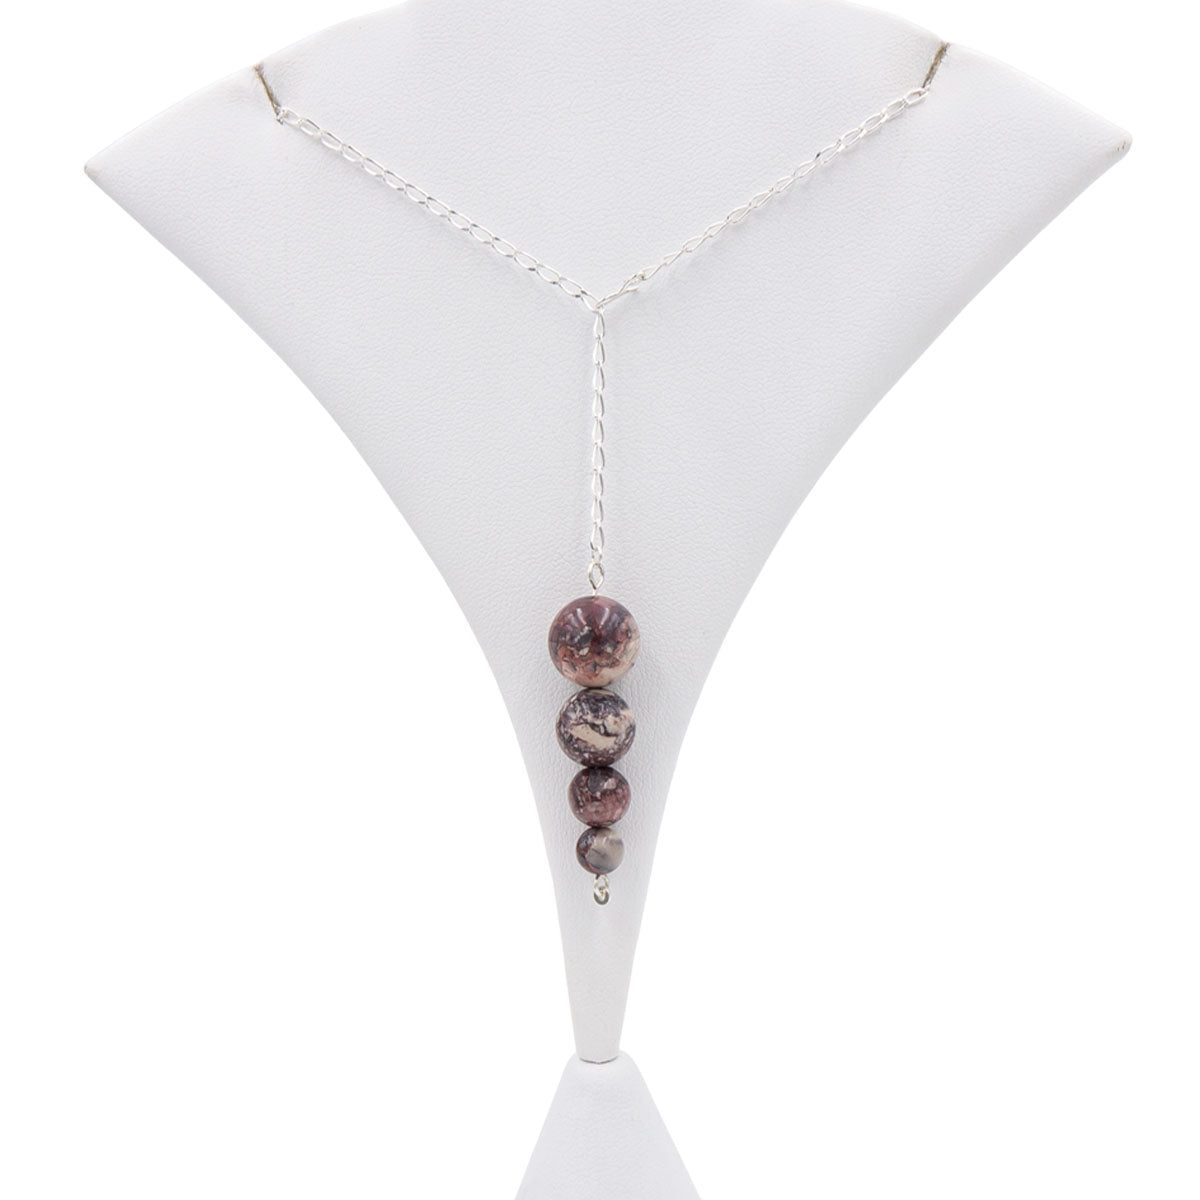 Earth Song Jewelry Handmade Porcelain Jasper Pendant Sterling Silver Lariat Necklace - Eco-Friendly Jewelry handmade in Colorado, USA